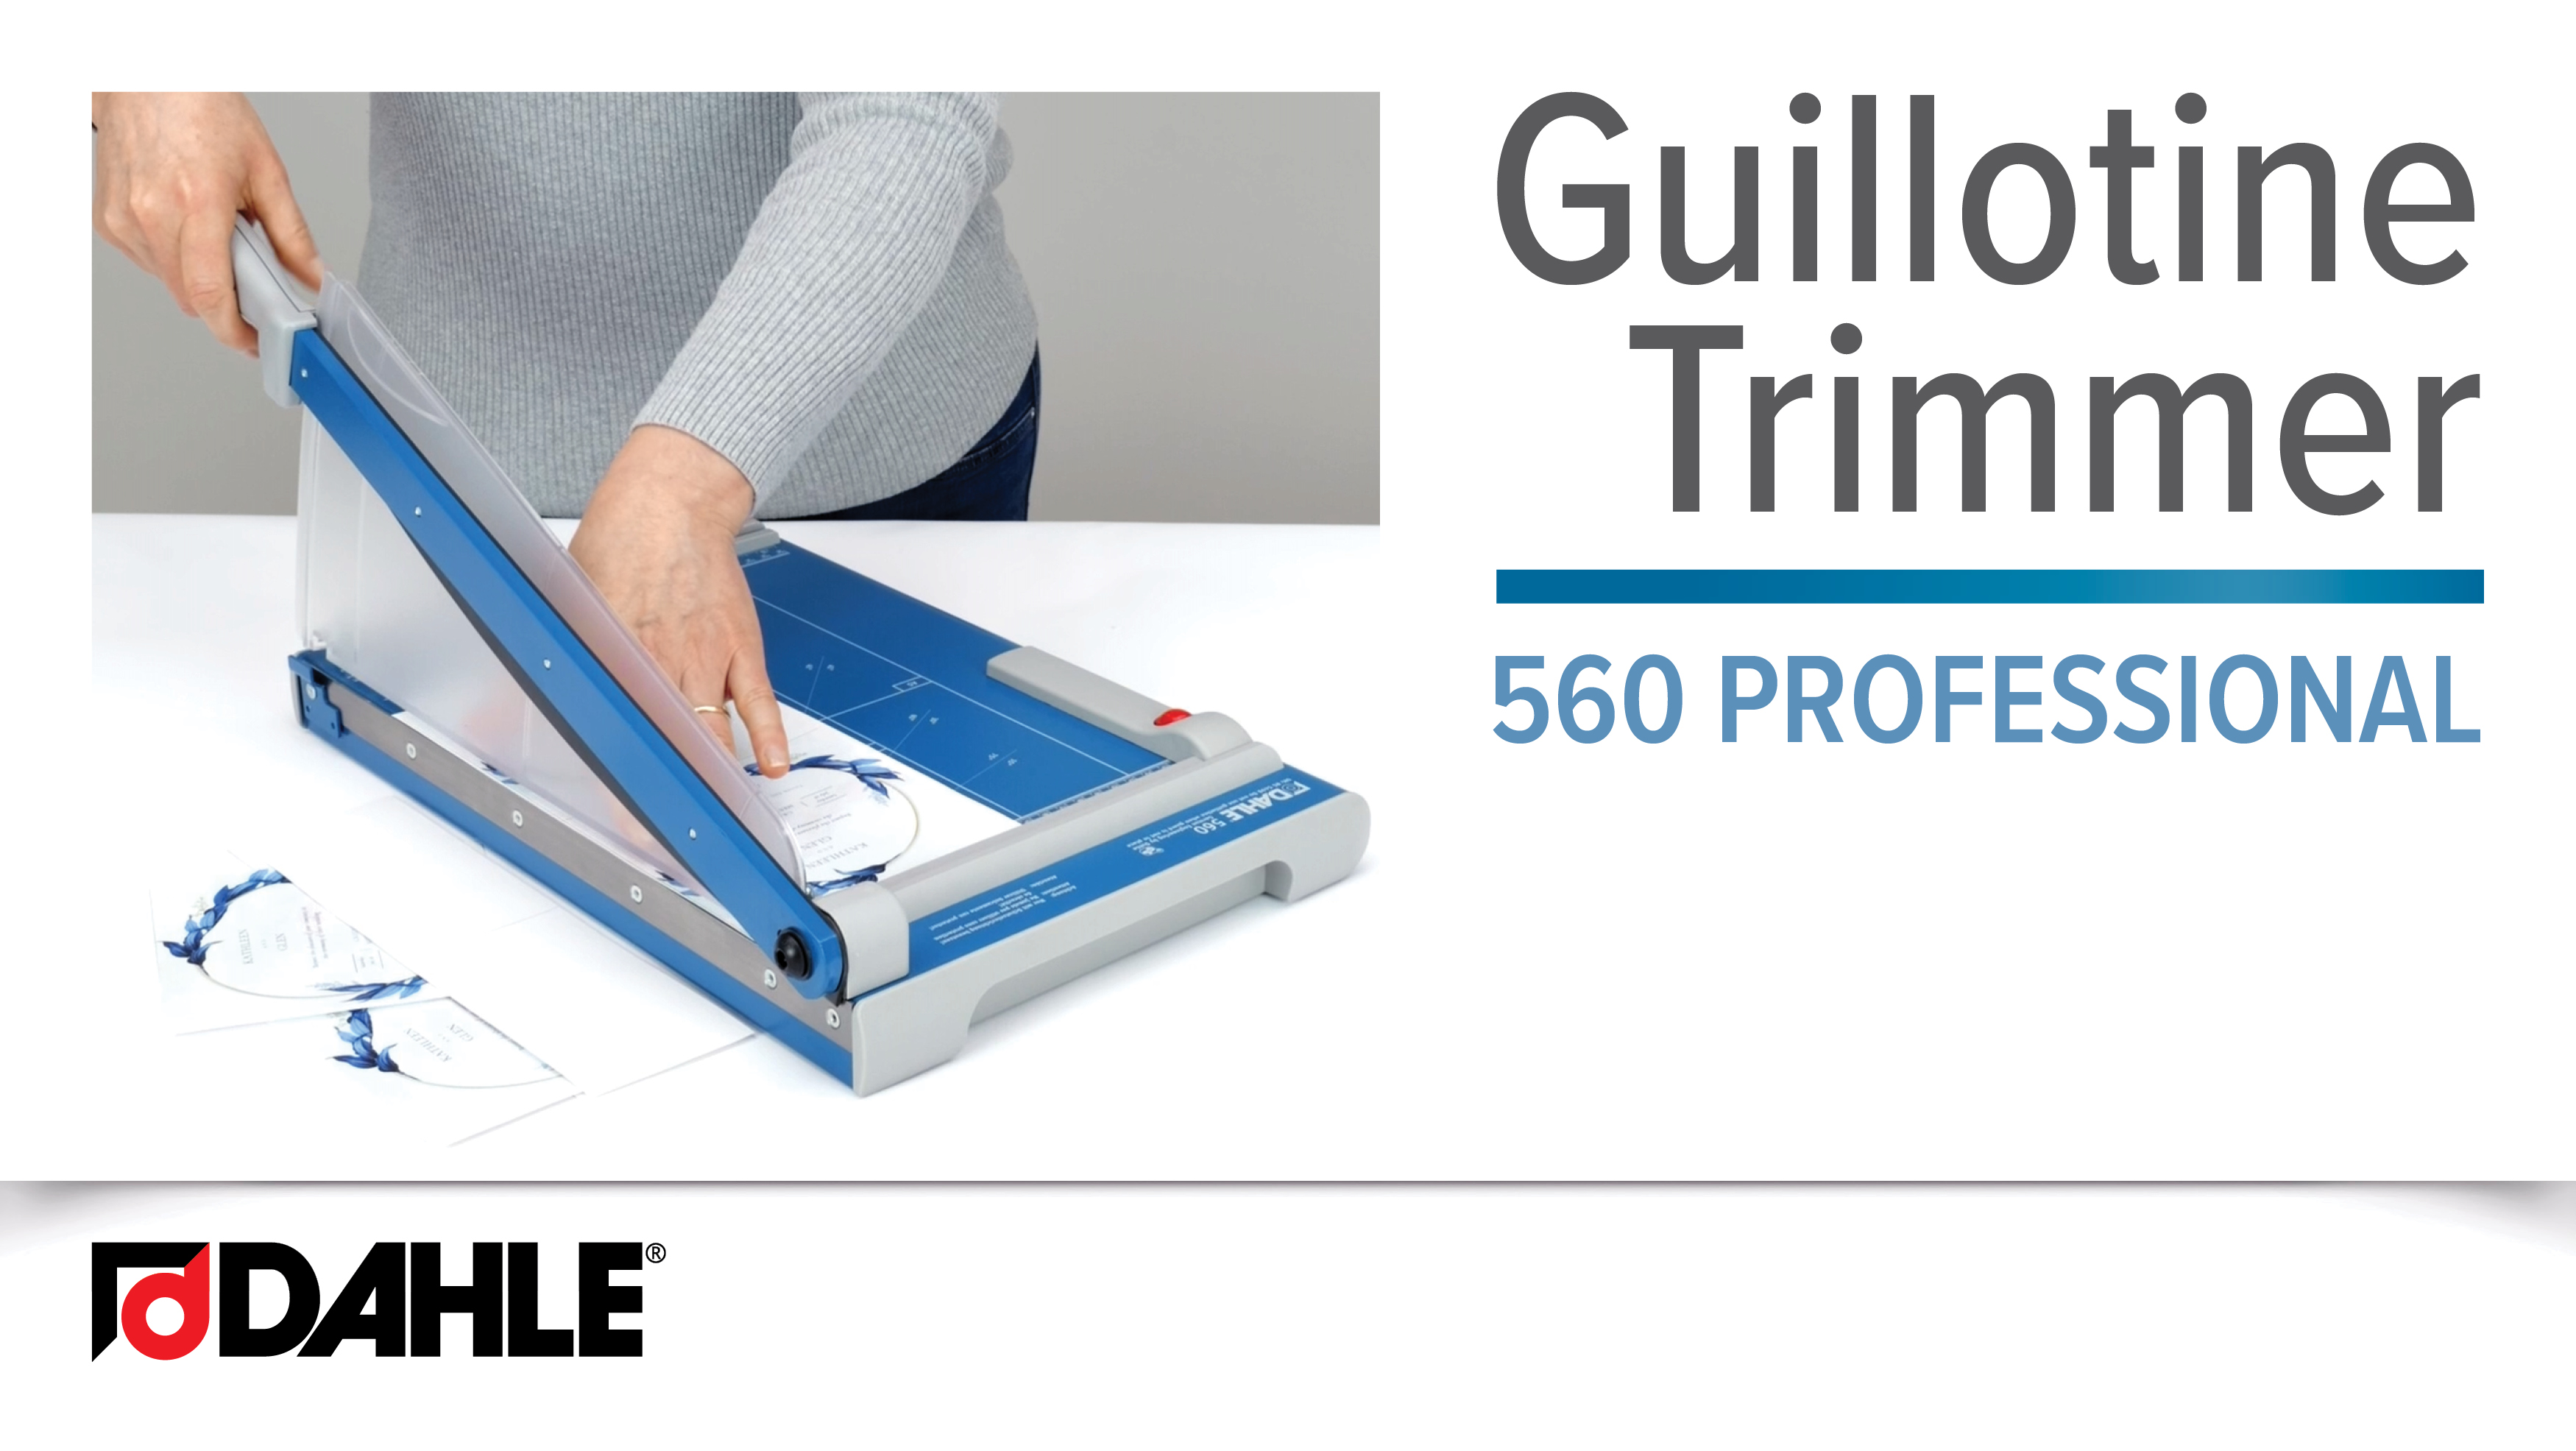 <big><strong>Dahle 560 </strong></big><br>Professional Guillotine